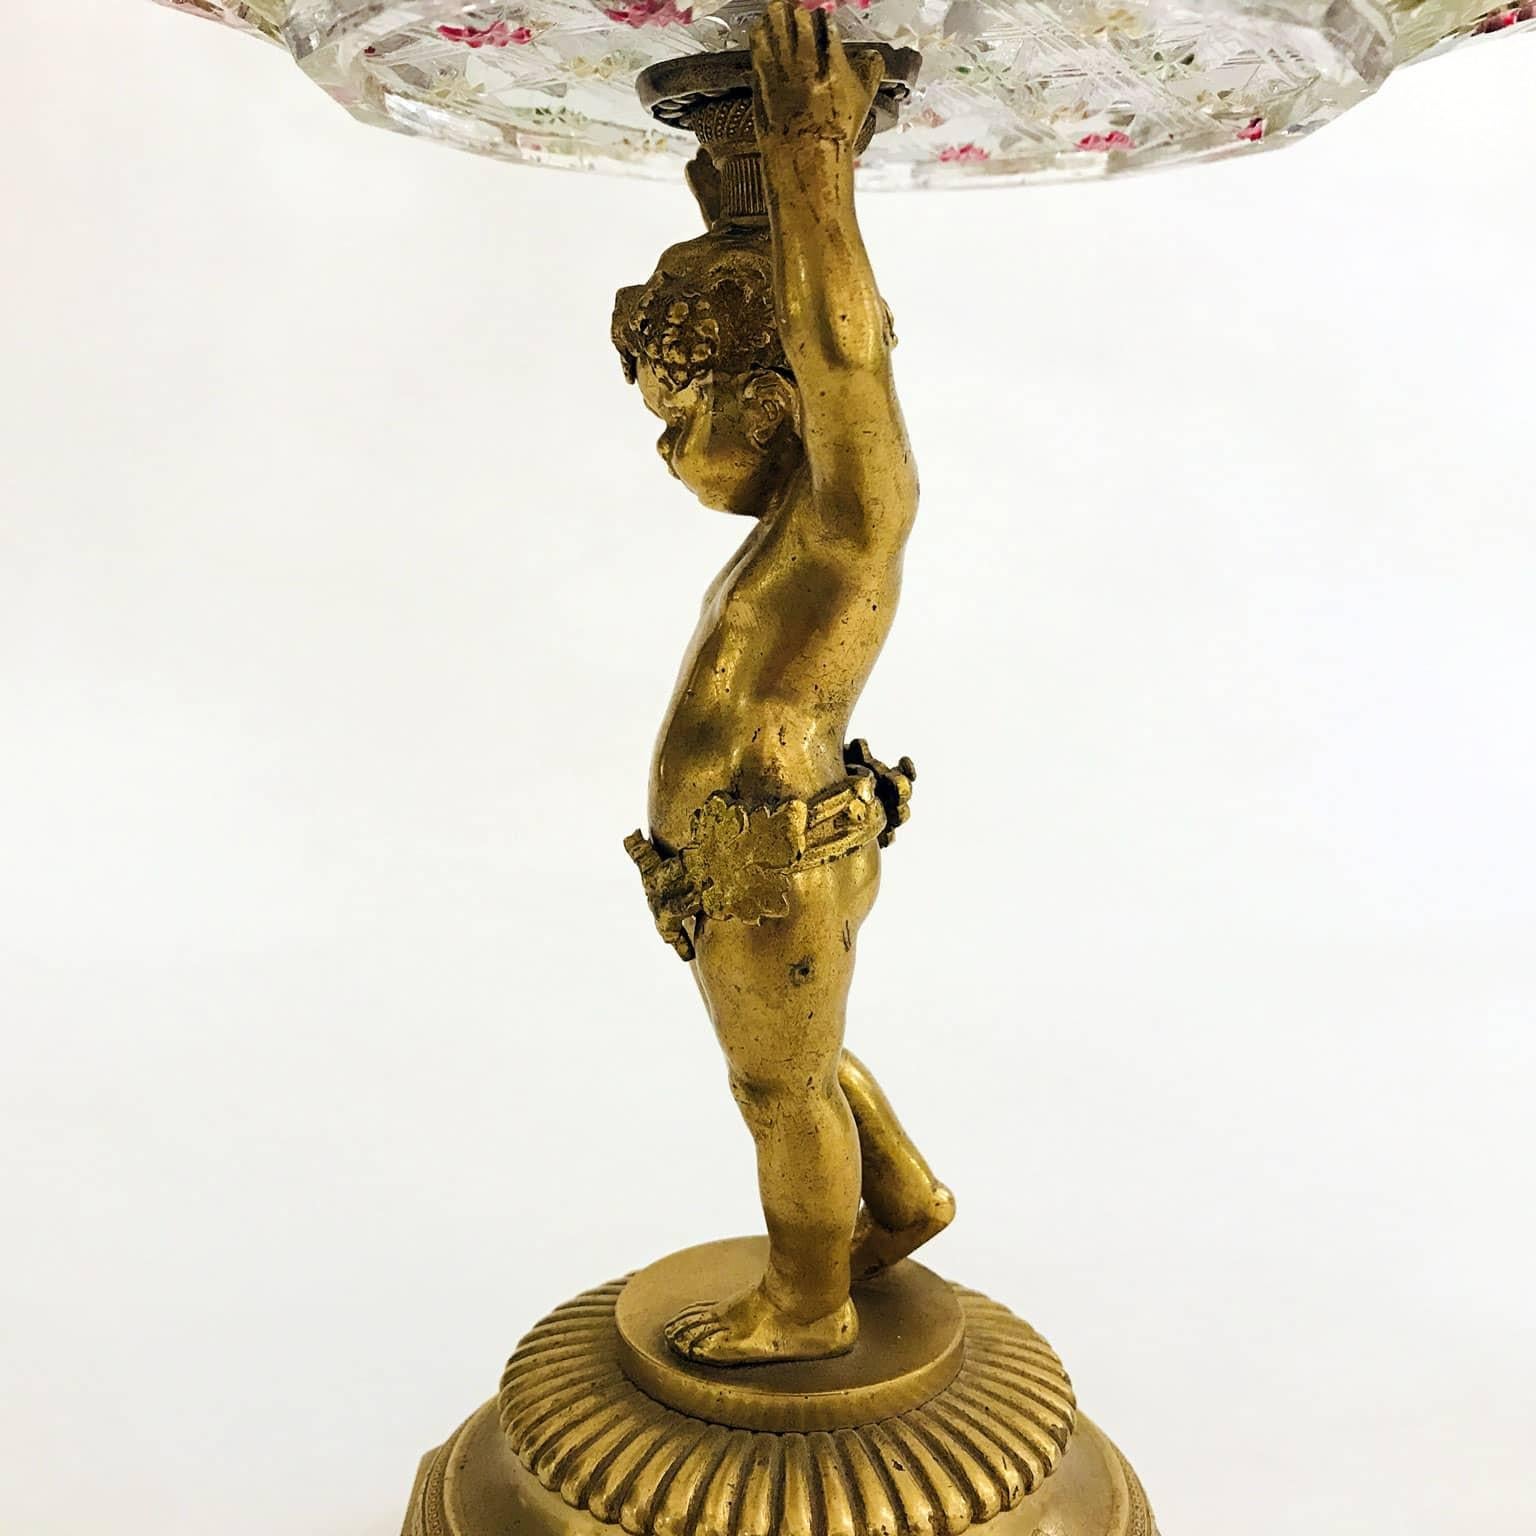 Pair of Austrian Gilded Figural Comports with Putti 19th Century For Sale 5